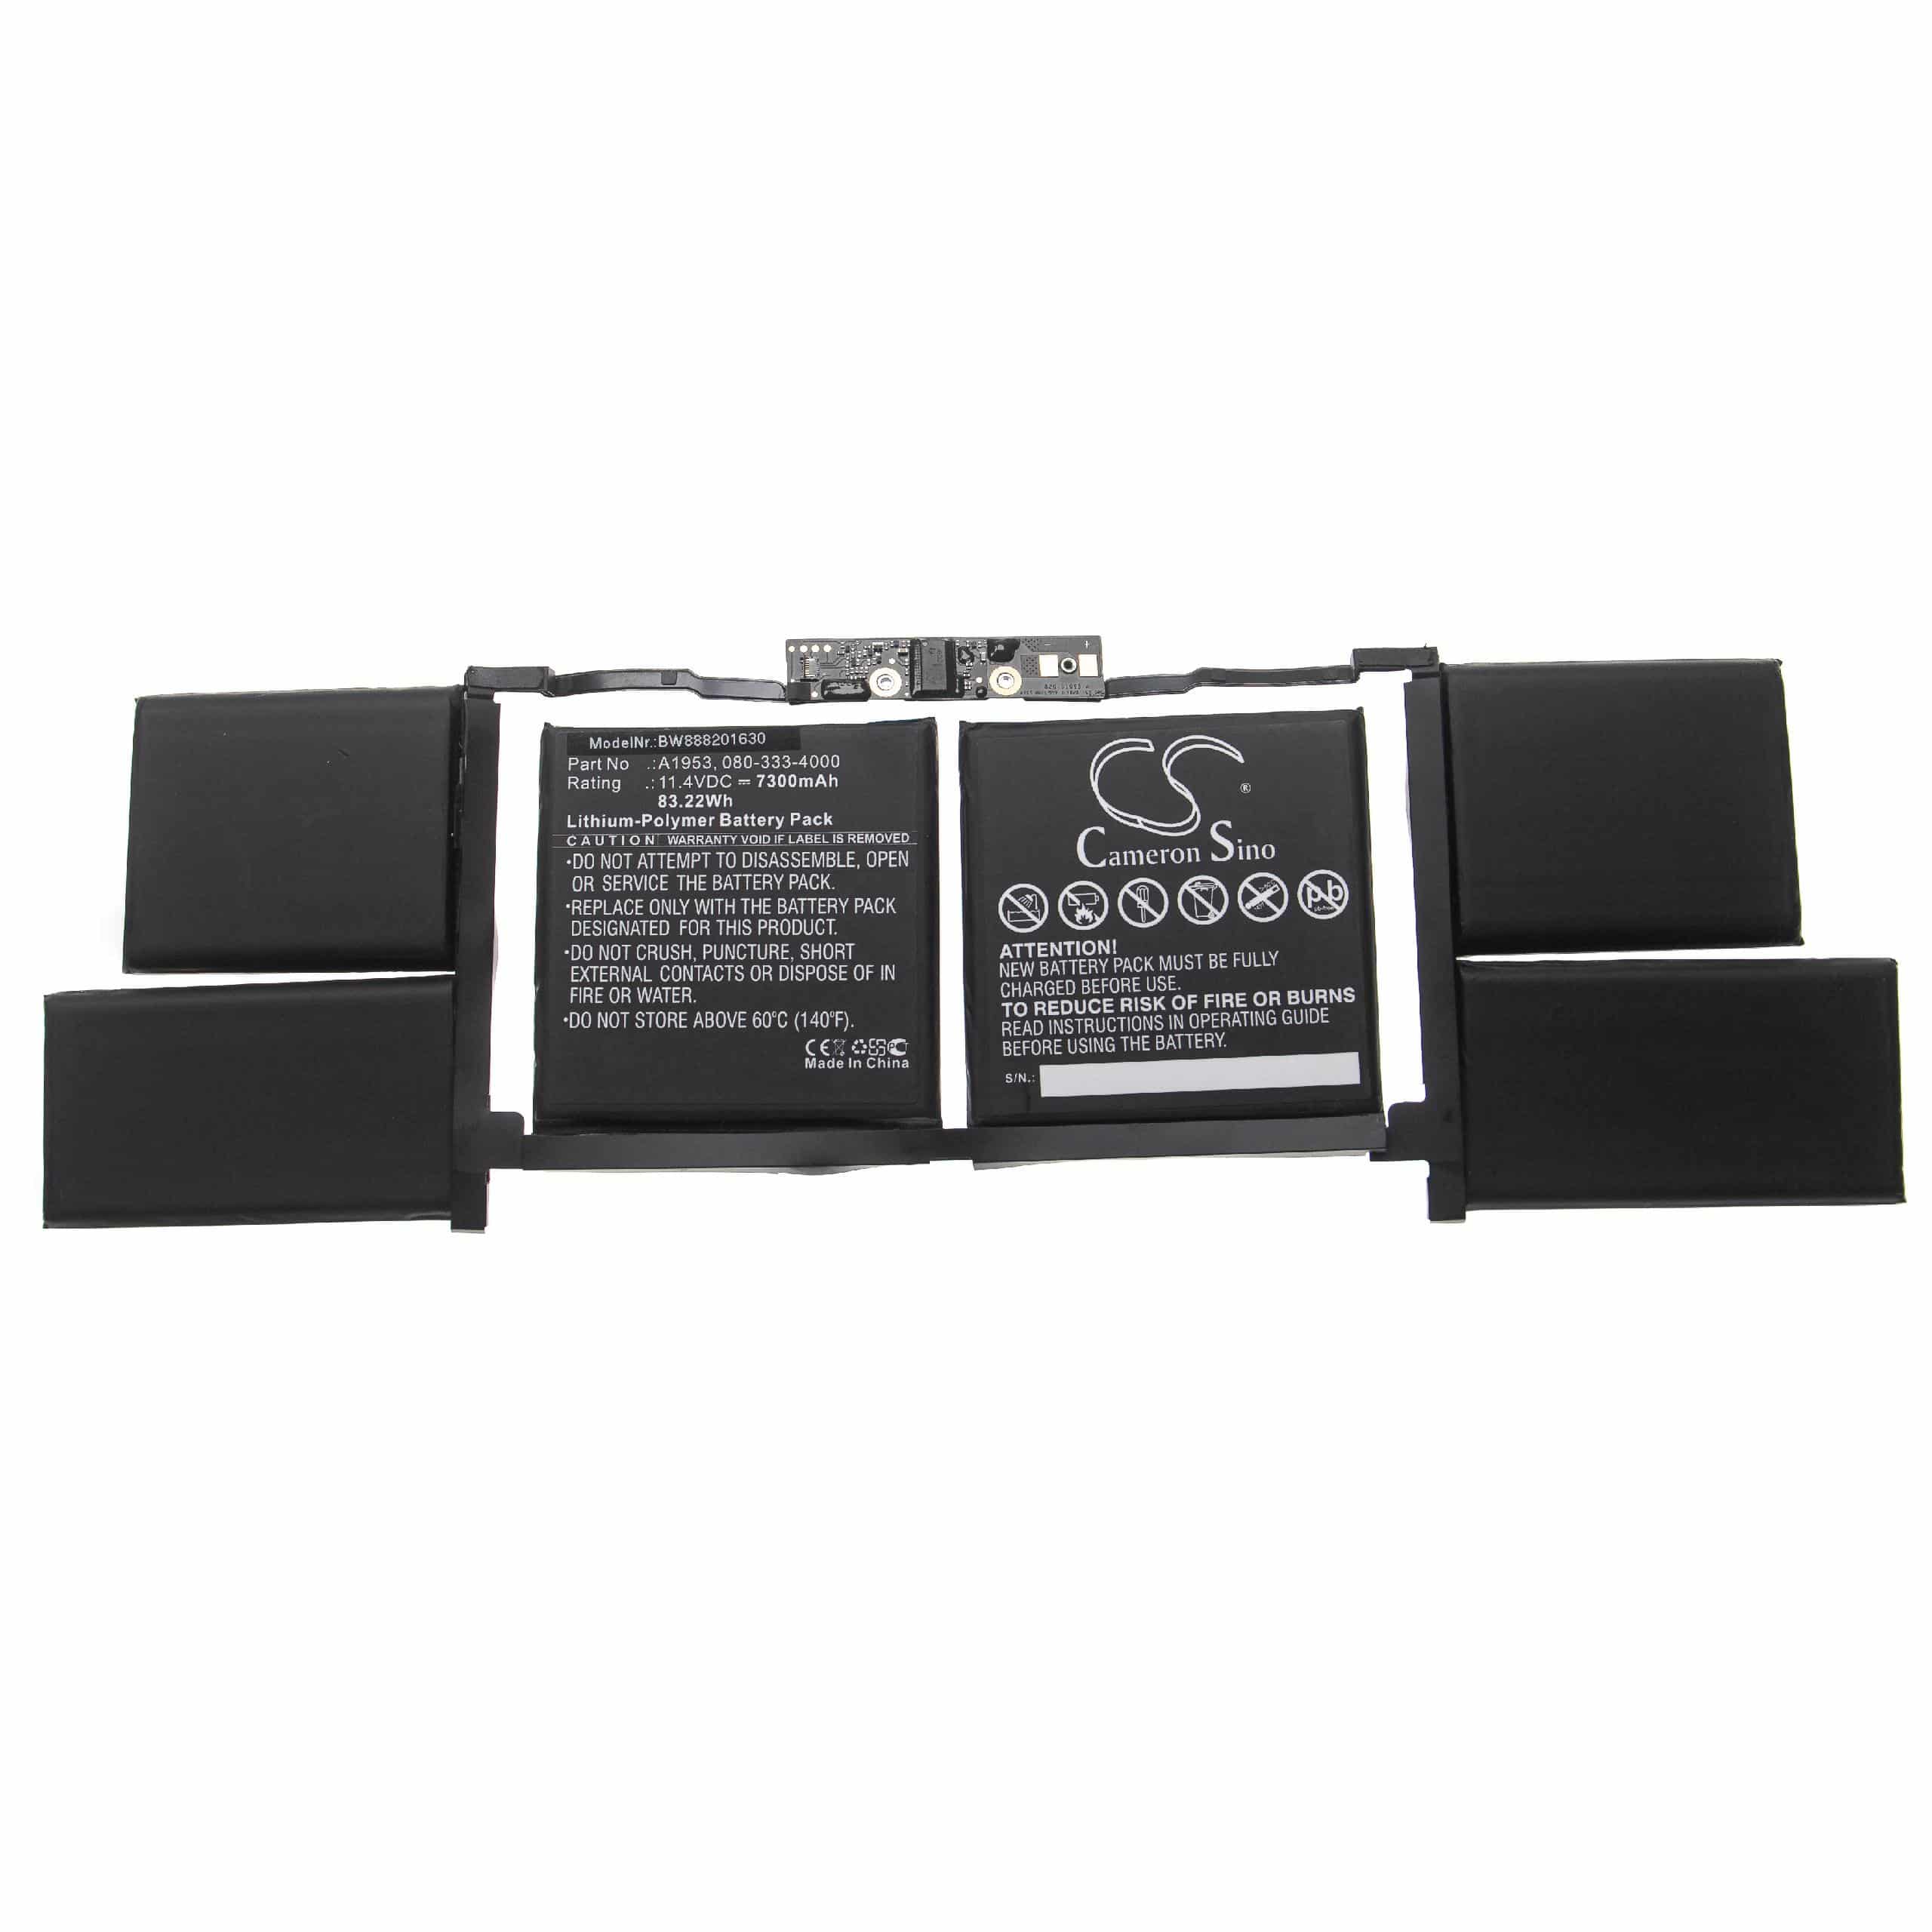 Notebook Battery Replacement for Apple 020-02391, 820-01095, 080-333-4000 - 7300mAh 11.4V Li-polymer, black